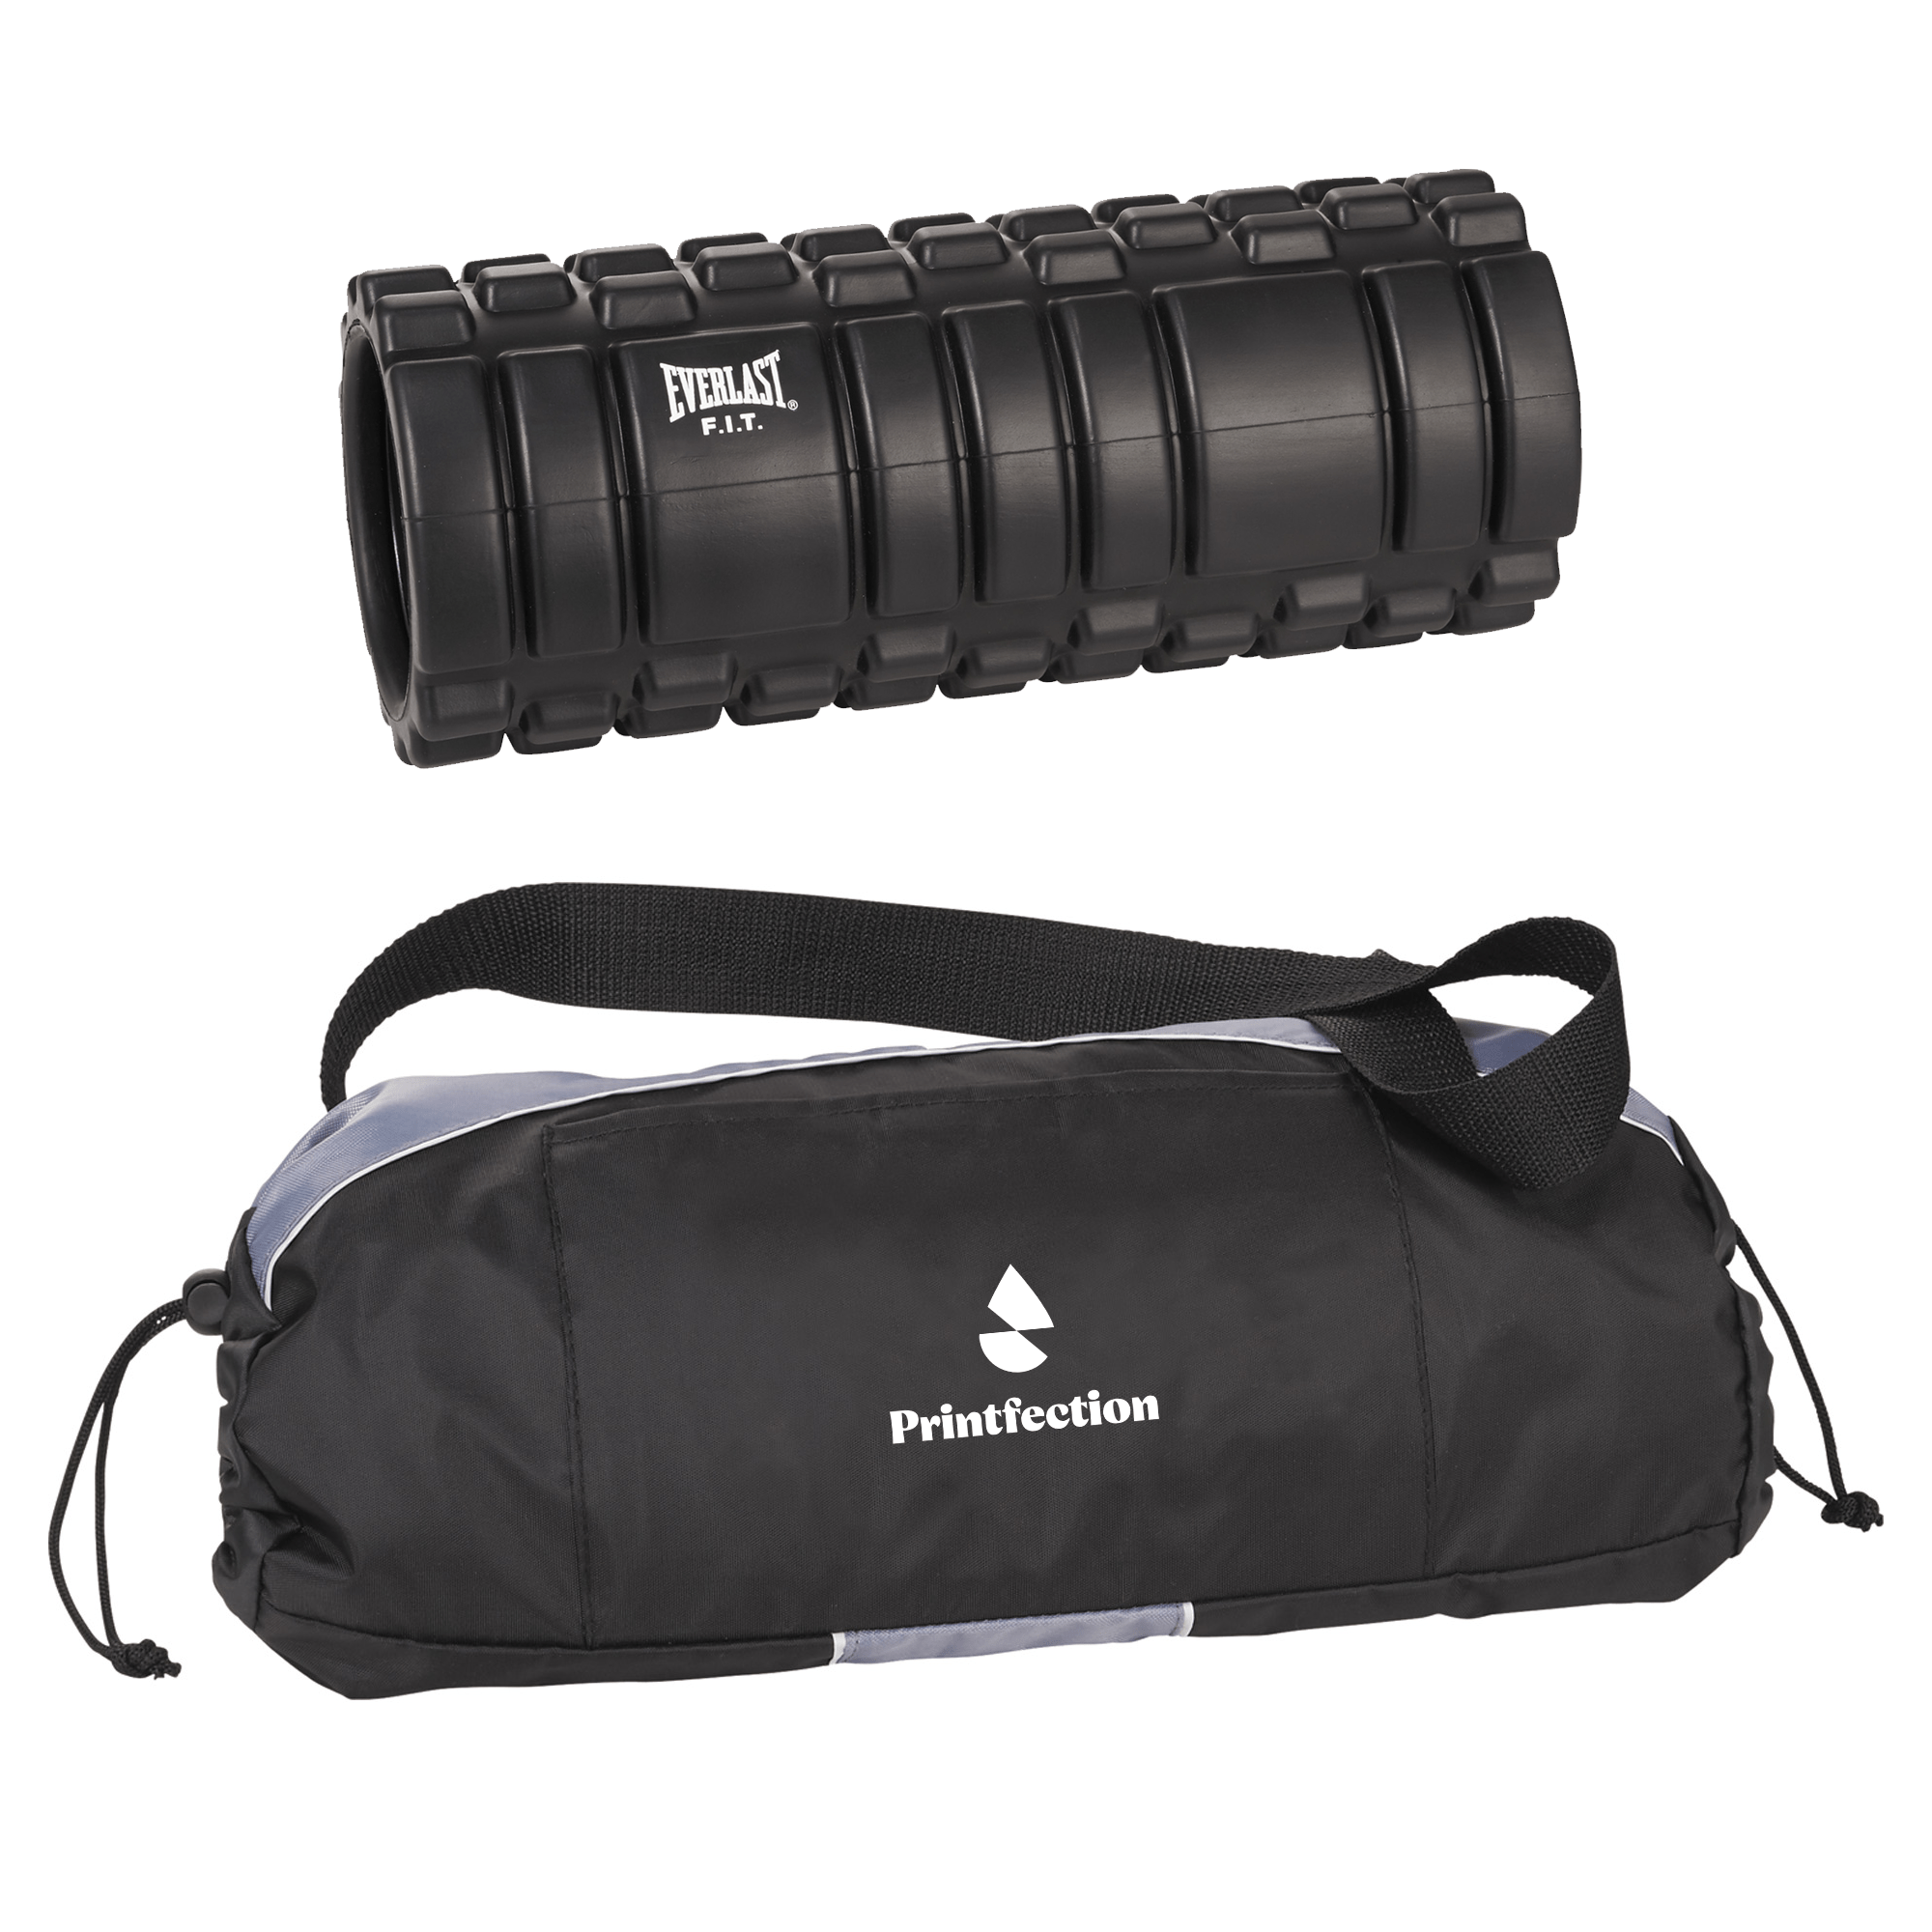 foam roller with corporate swag logo